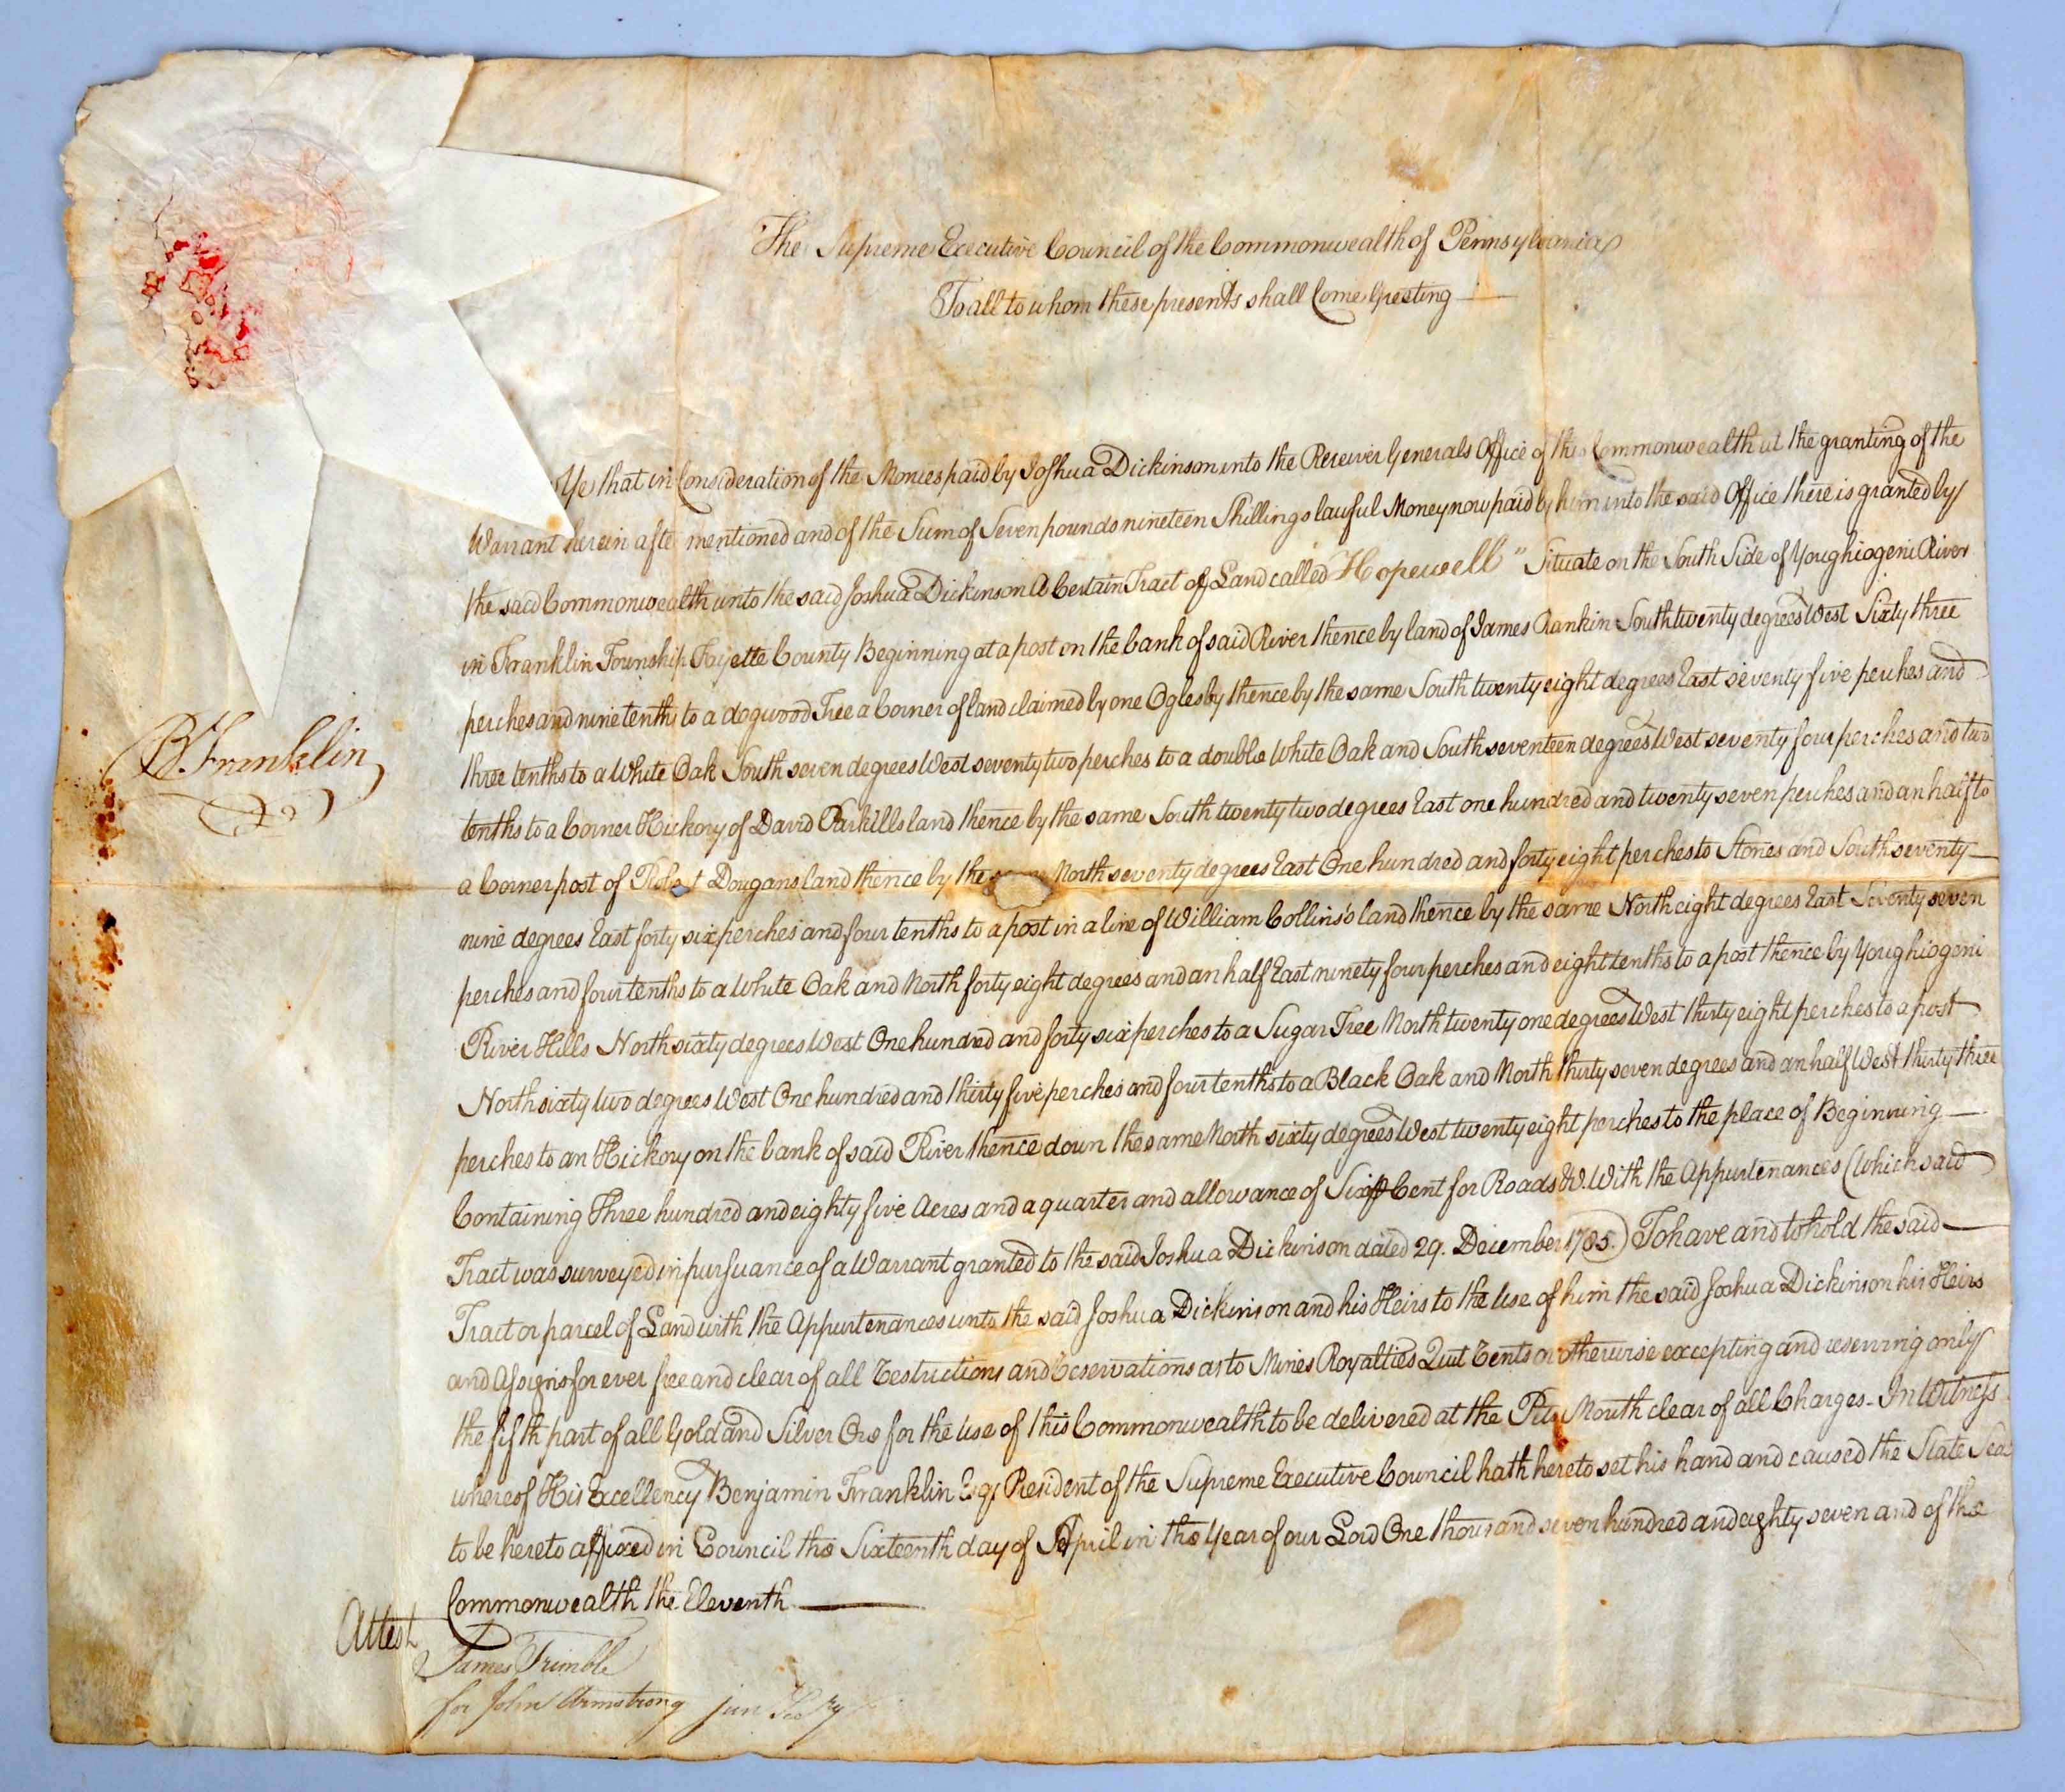 1787 land deed signed by Benjamin Franklin